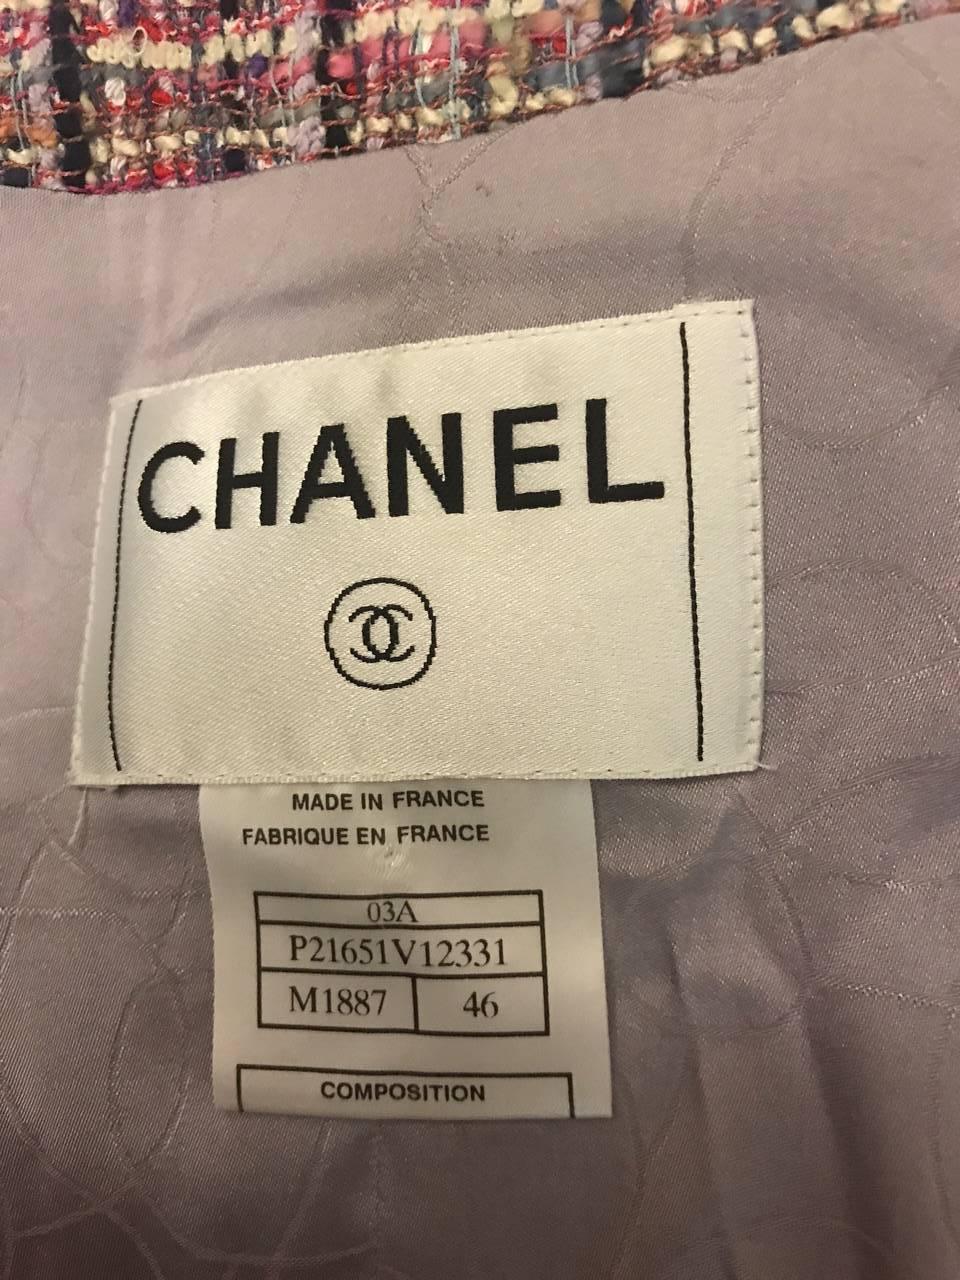 Chanel 03A Multicolor A-Line Skirt Suit Ensemble with Scarf 1